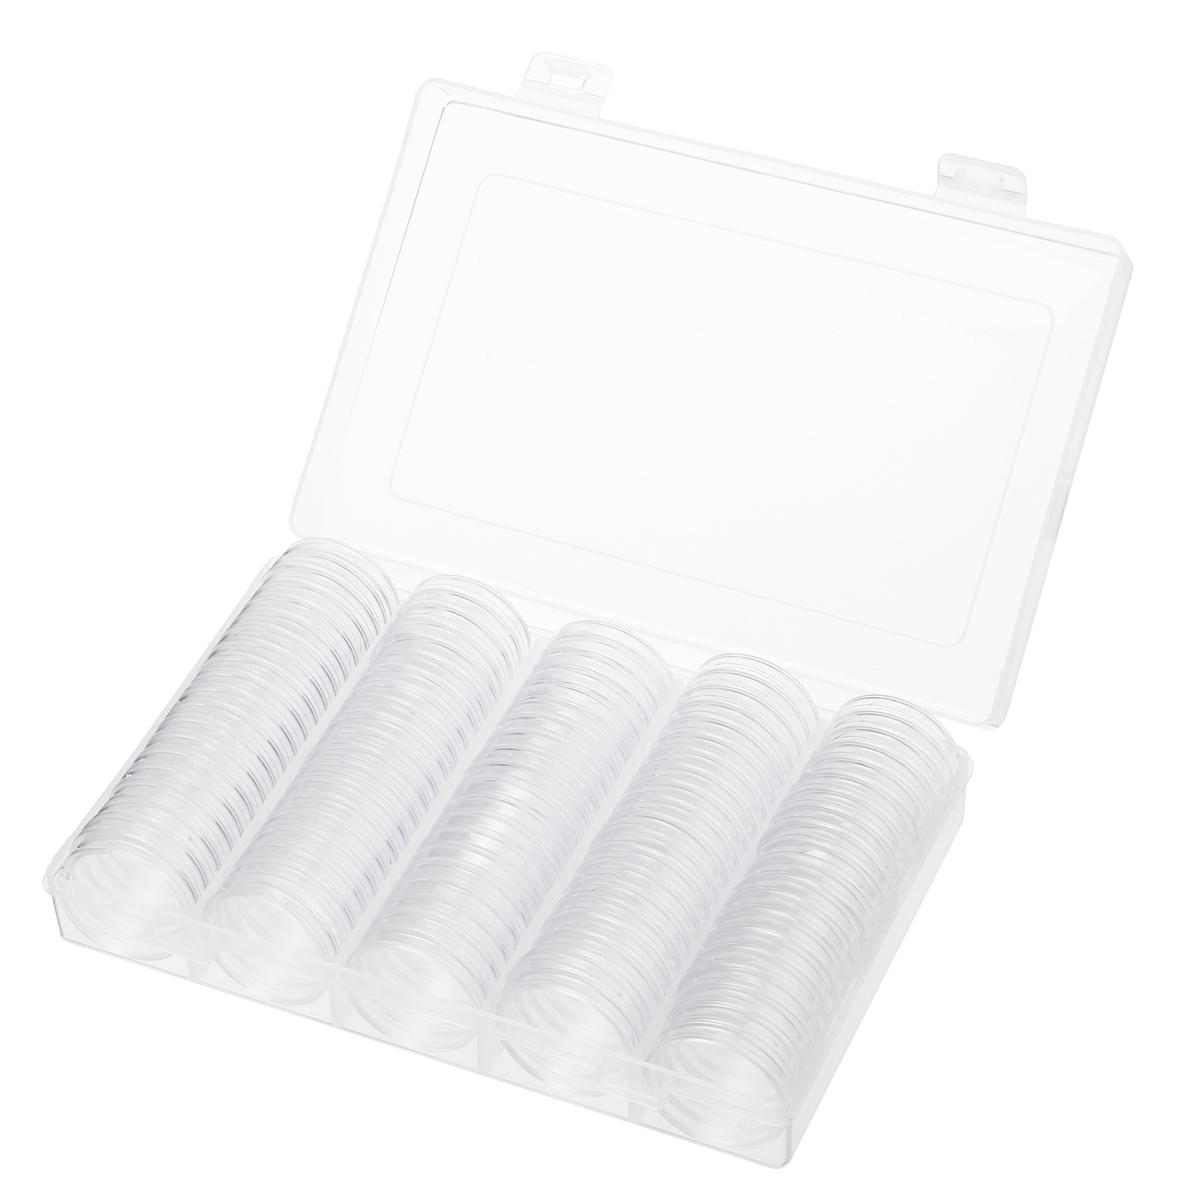 100Pcs/Lot 20/25/27/30mm Clear Plastic Coin Holder Universal Commemorative Coin Shell Collector COD